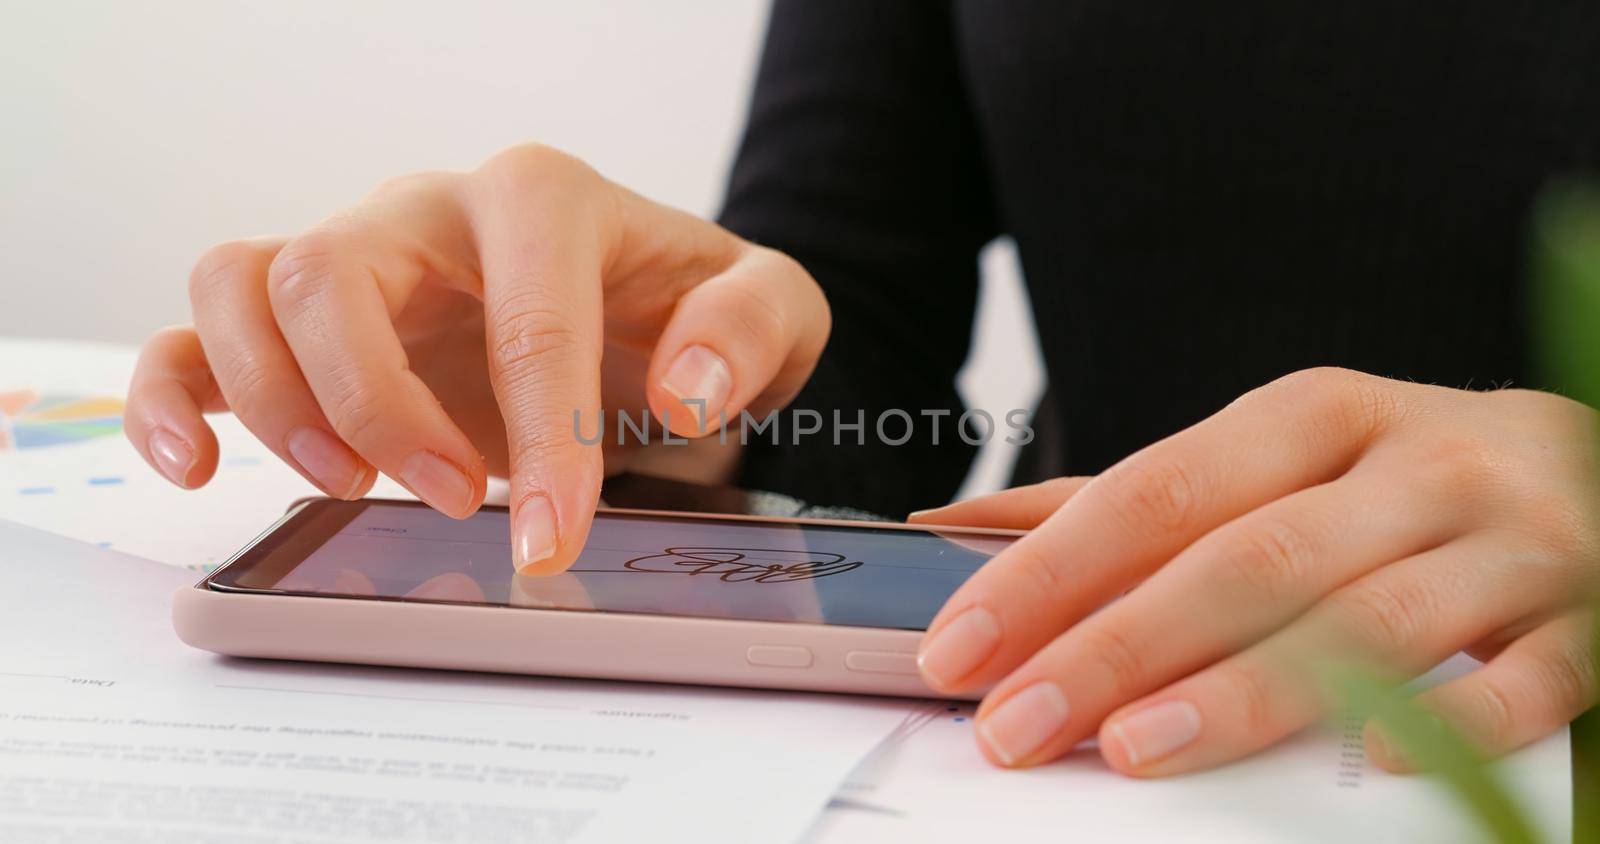 Digital signature on phone. Bussines woman signs on the smartphone screen electronic signature concept. E-signing. Female hand signing digital contract on lighted smartphone screen with finger.